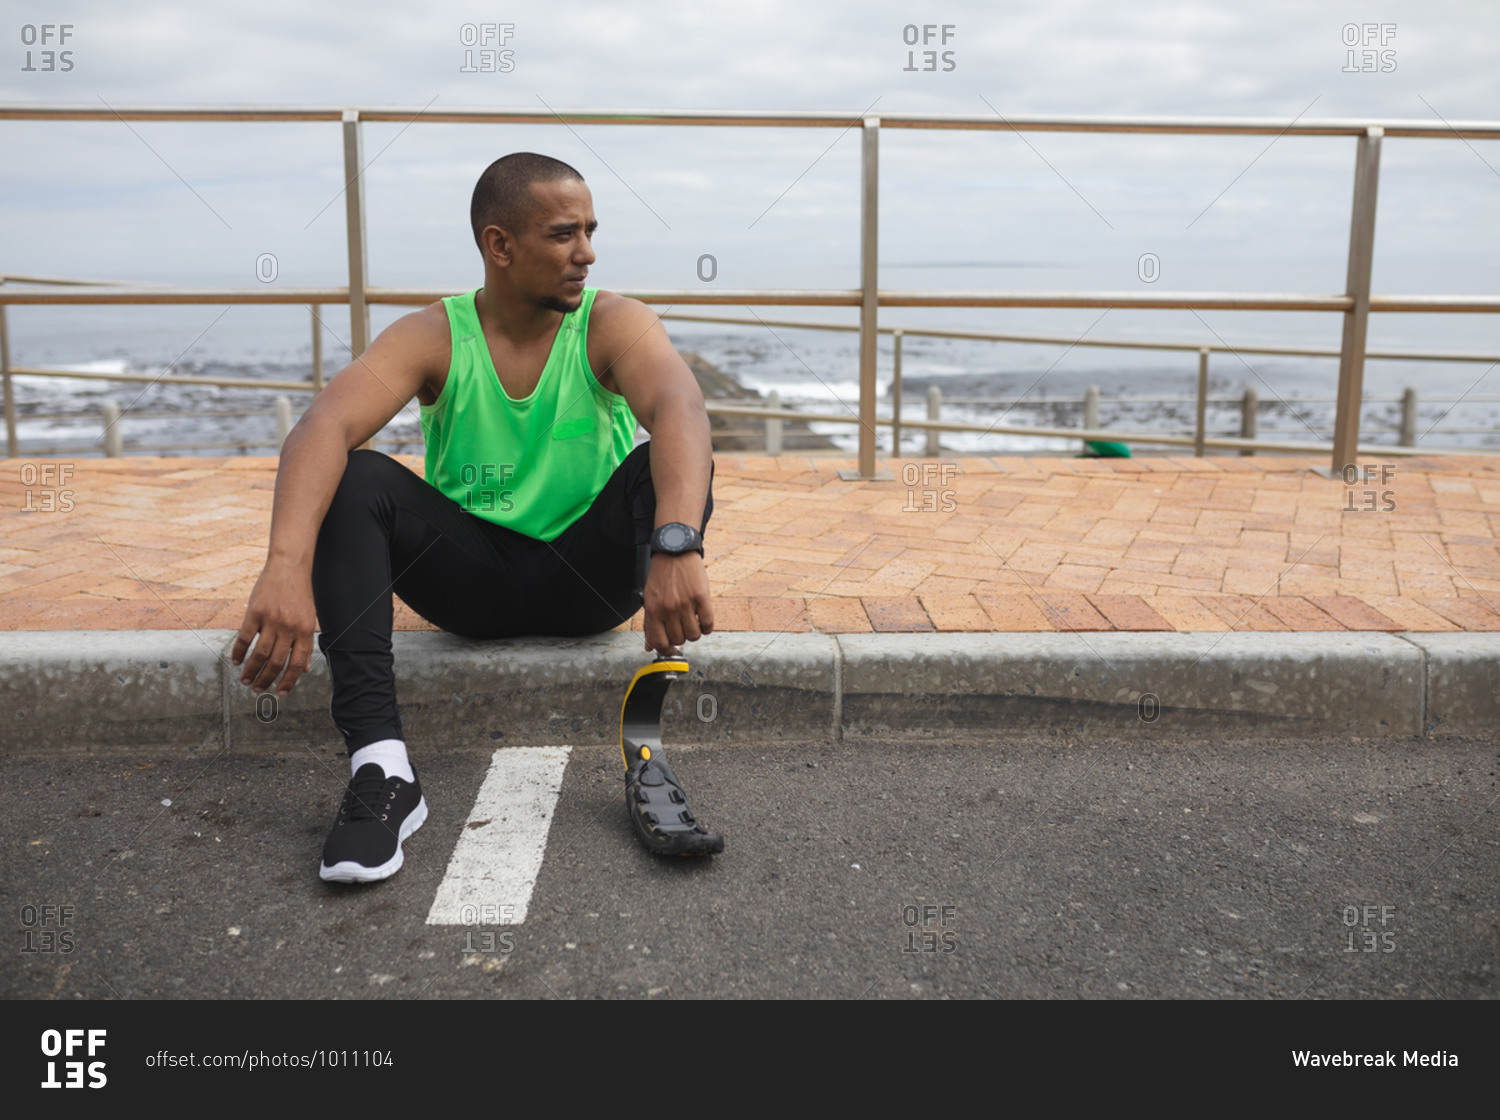 Disabled mixed race man with a prosthetic leg and running blade working out by the coast, sitting on the pavement by a road and taking a break. Fitness disability healthy lifestyle.